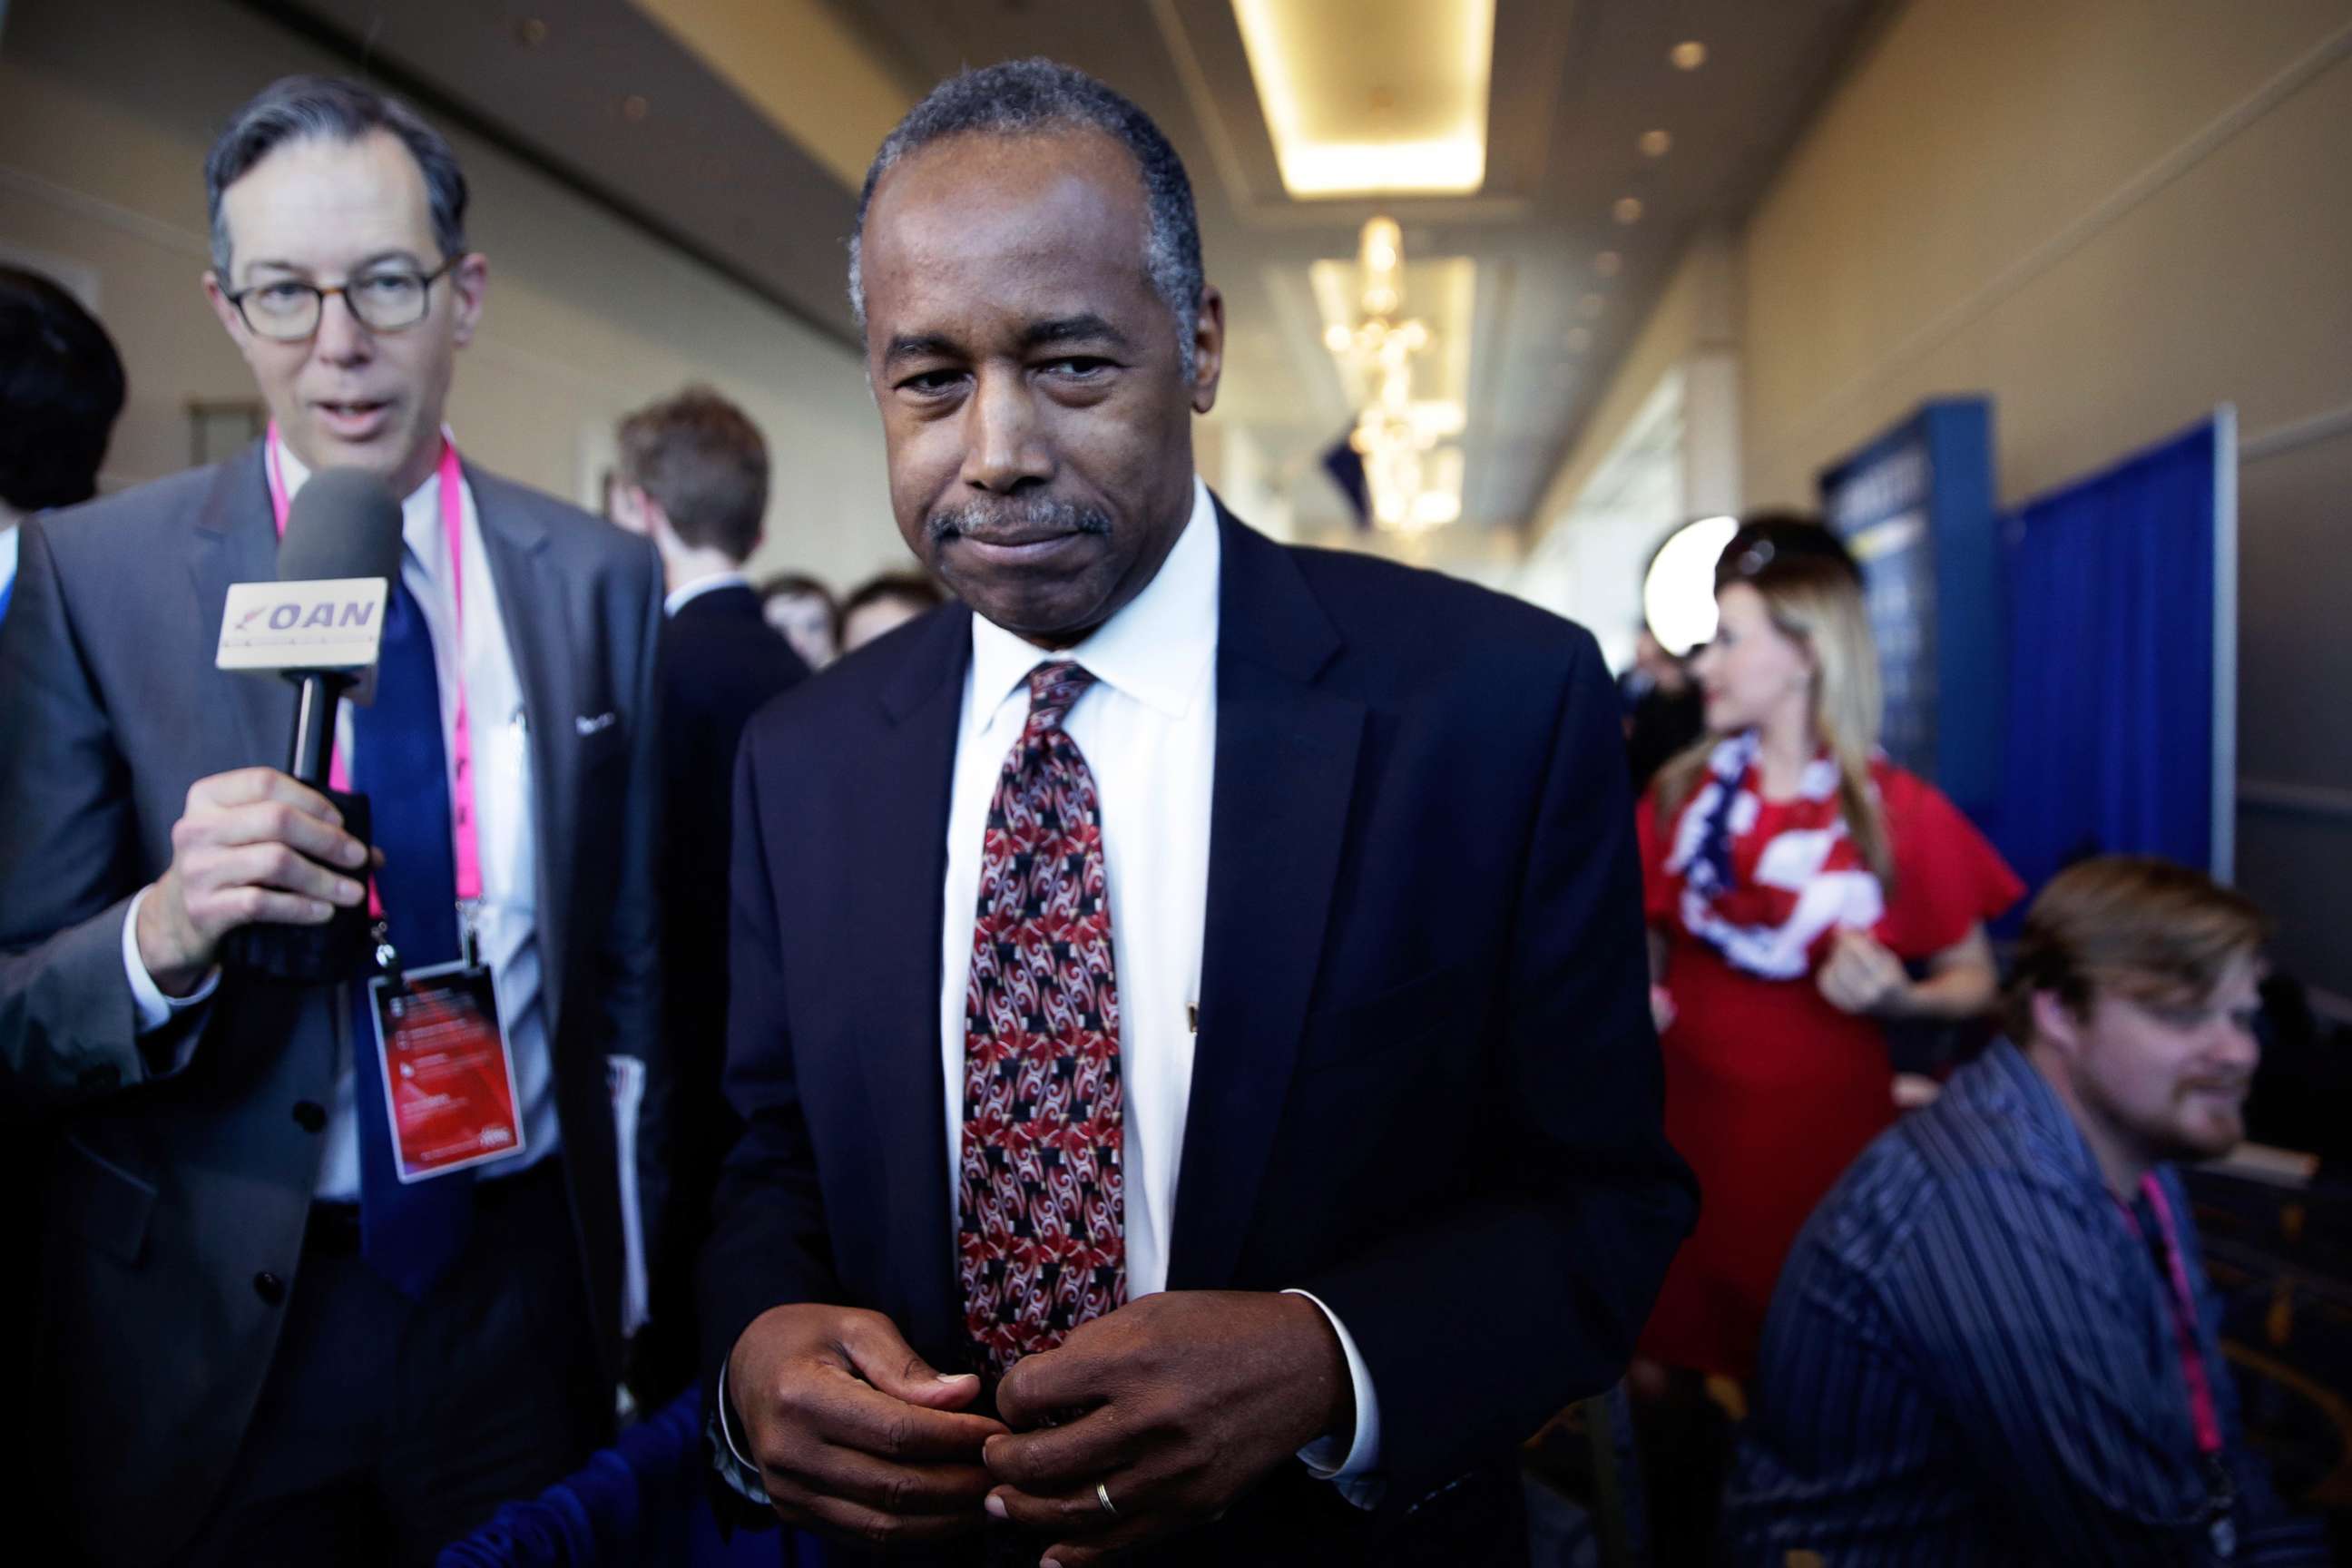 PHOTO: Secretary of Housing and Urban Development Ben Carson attends the Conservative Political Action Conference (CPAC), Feb. 28, 2019 in National Harbor, Md.